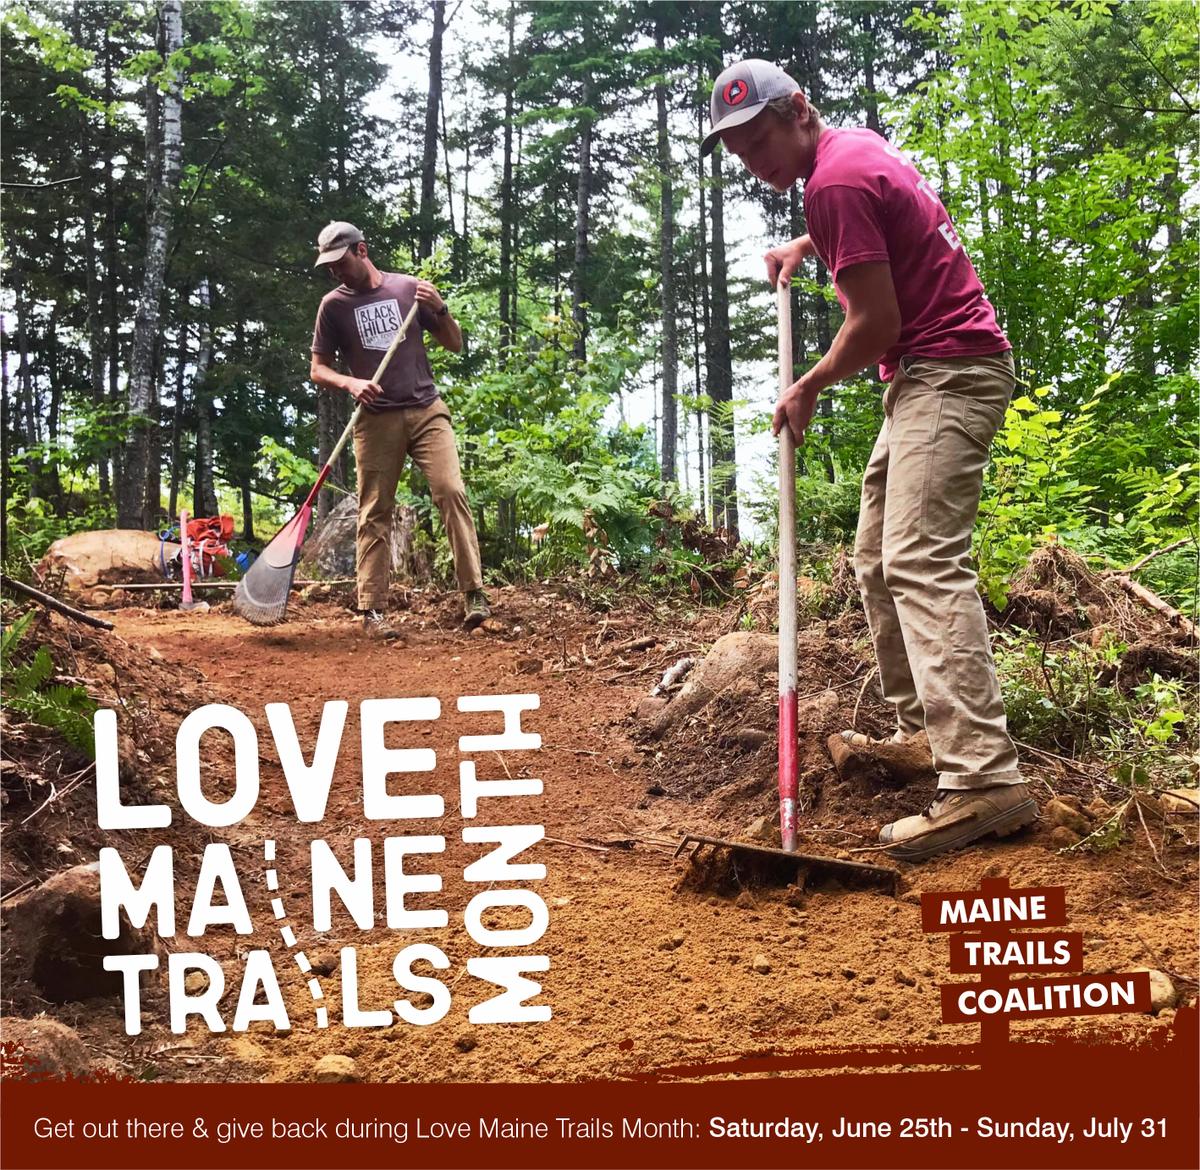 A person works on a trail with the text Love Maine Trails Month and the Maine Trail Coalition logo superimposed on the photo.